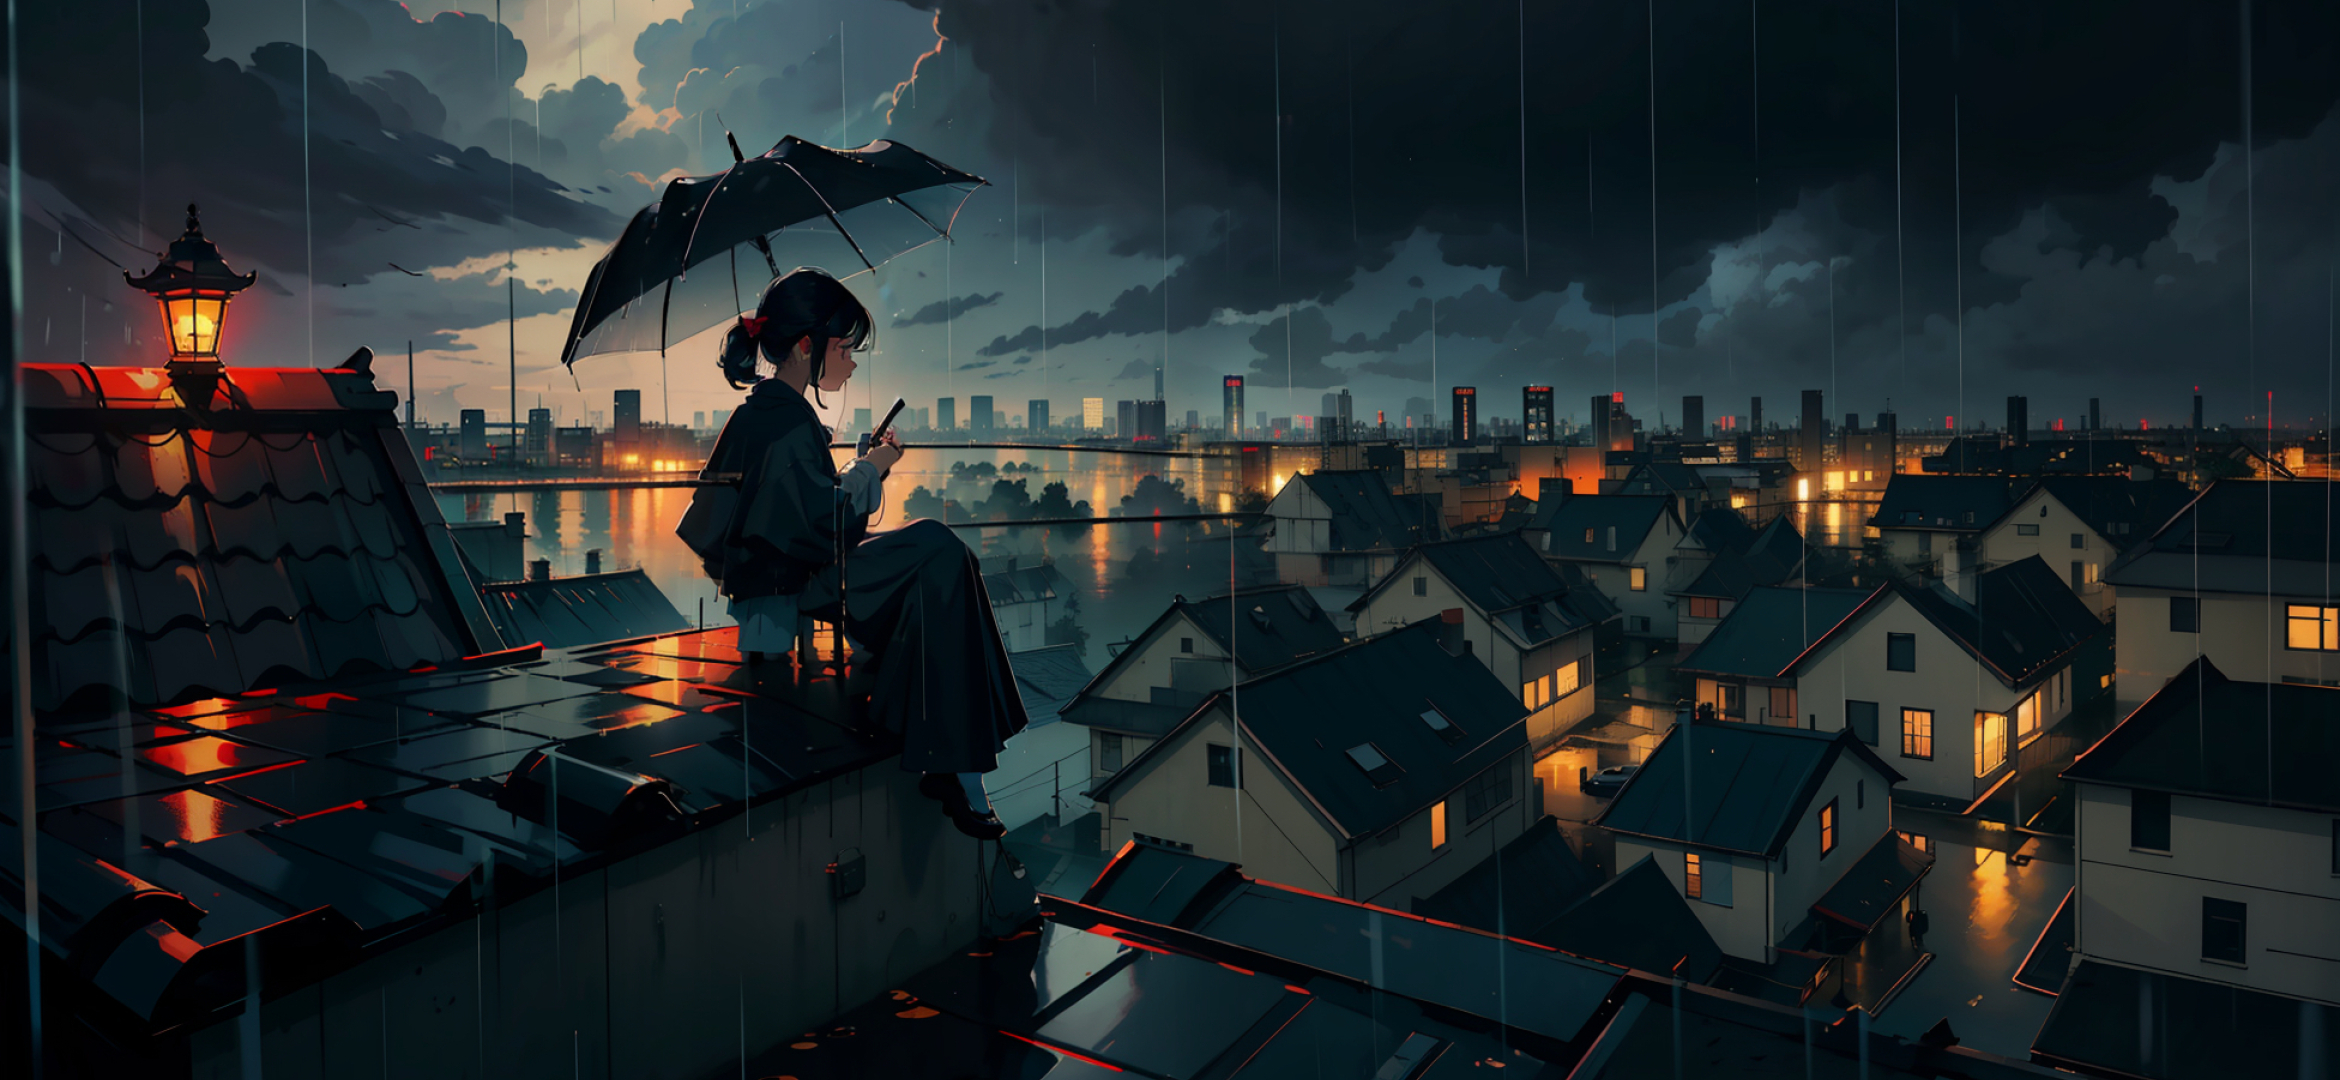 2340x1080 Resolution Anime Girl Disconnected to City 2340x1080 ...